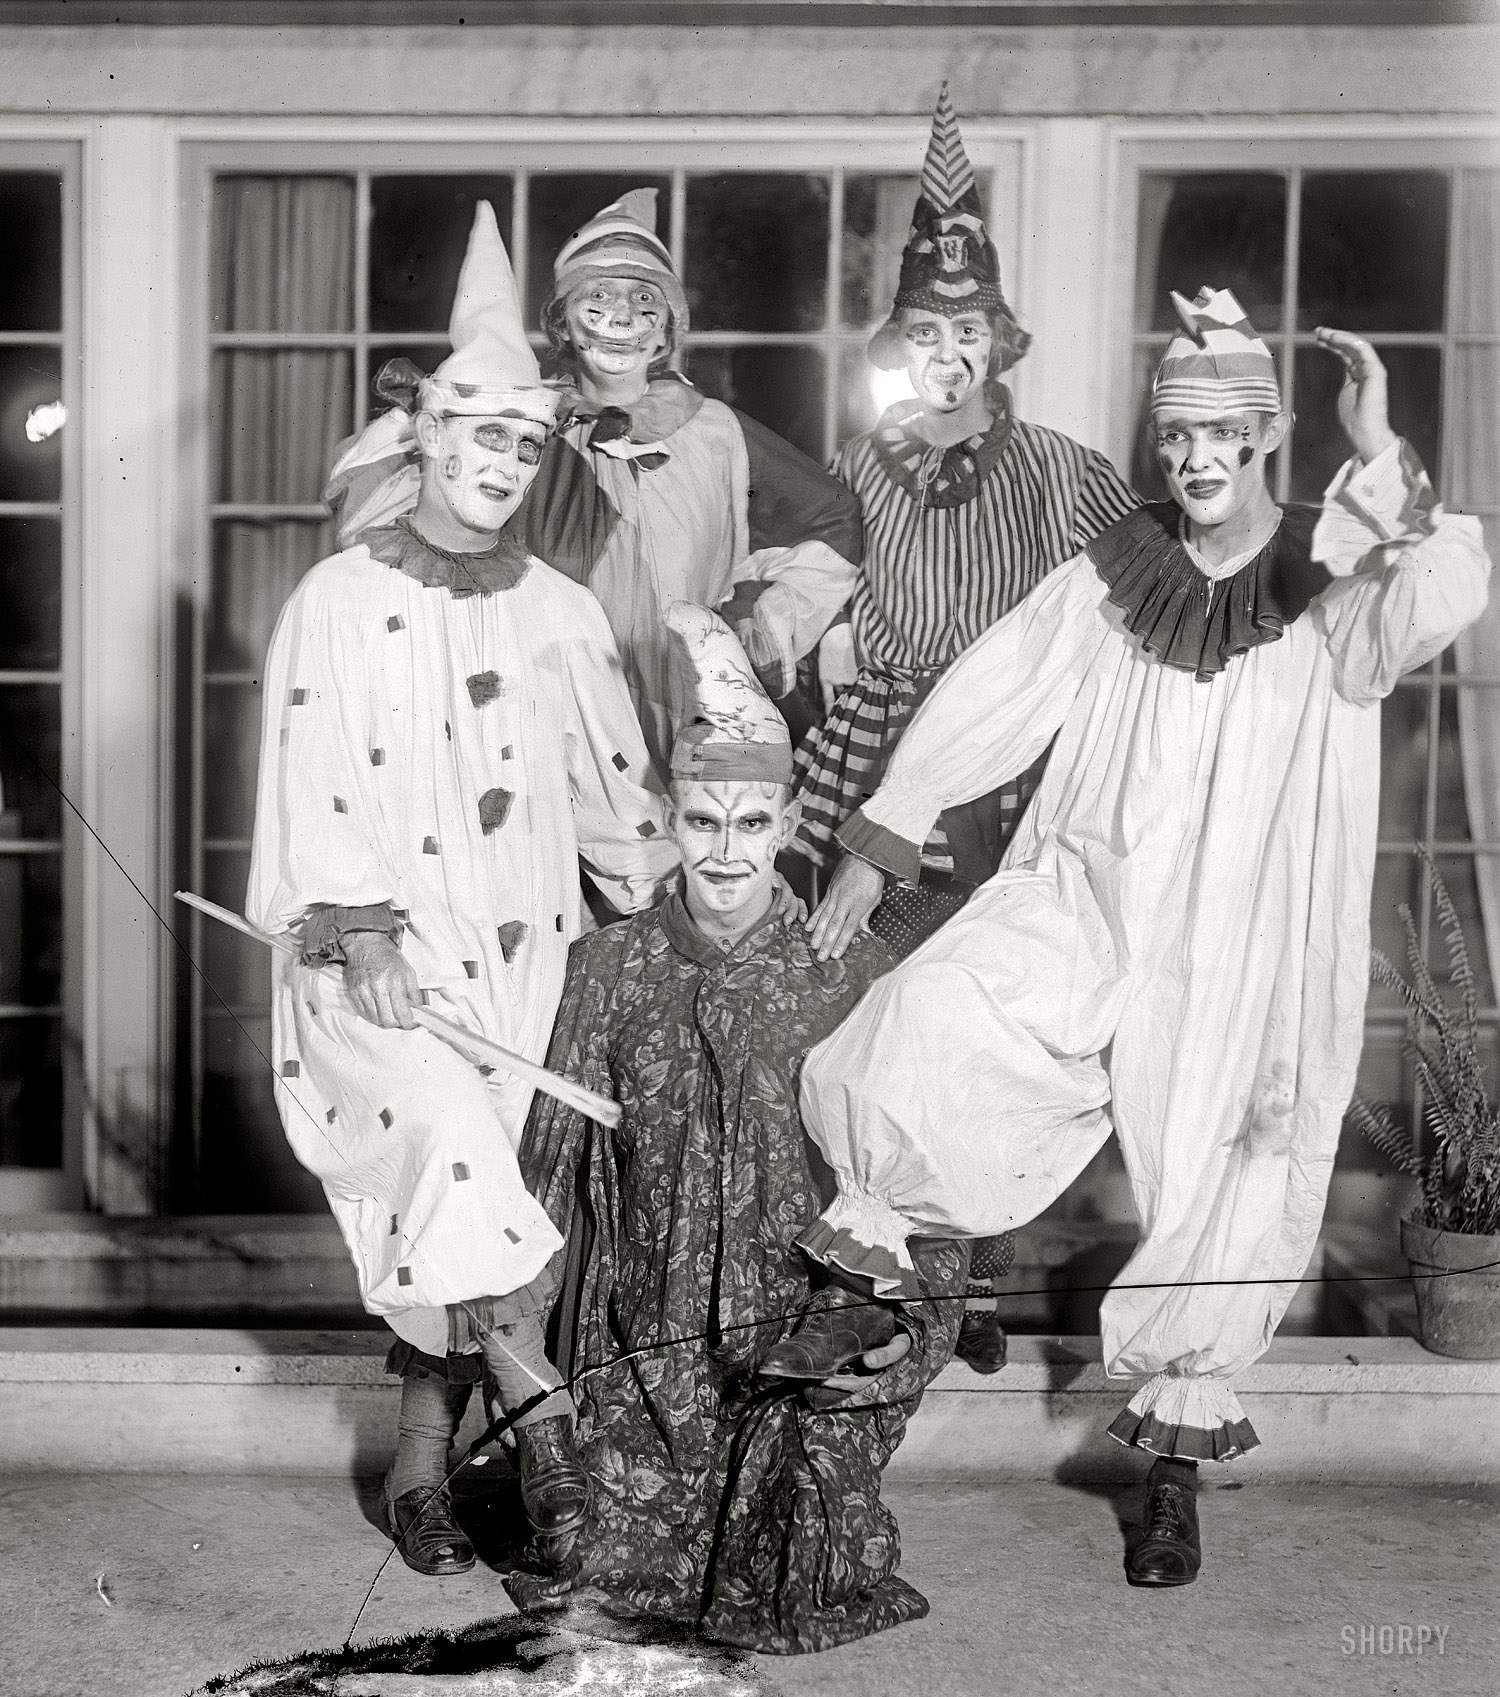 Washington circa 1925. "Y.W.C.A. Circus." Very little to go on here, but maybe that's just as well. Harris & Ewing Collection glass negative. View full size.